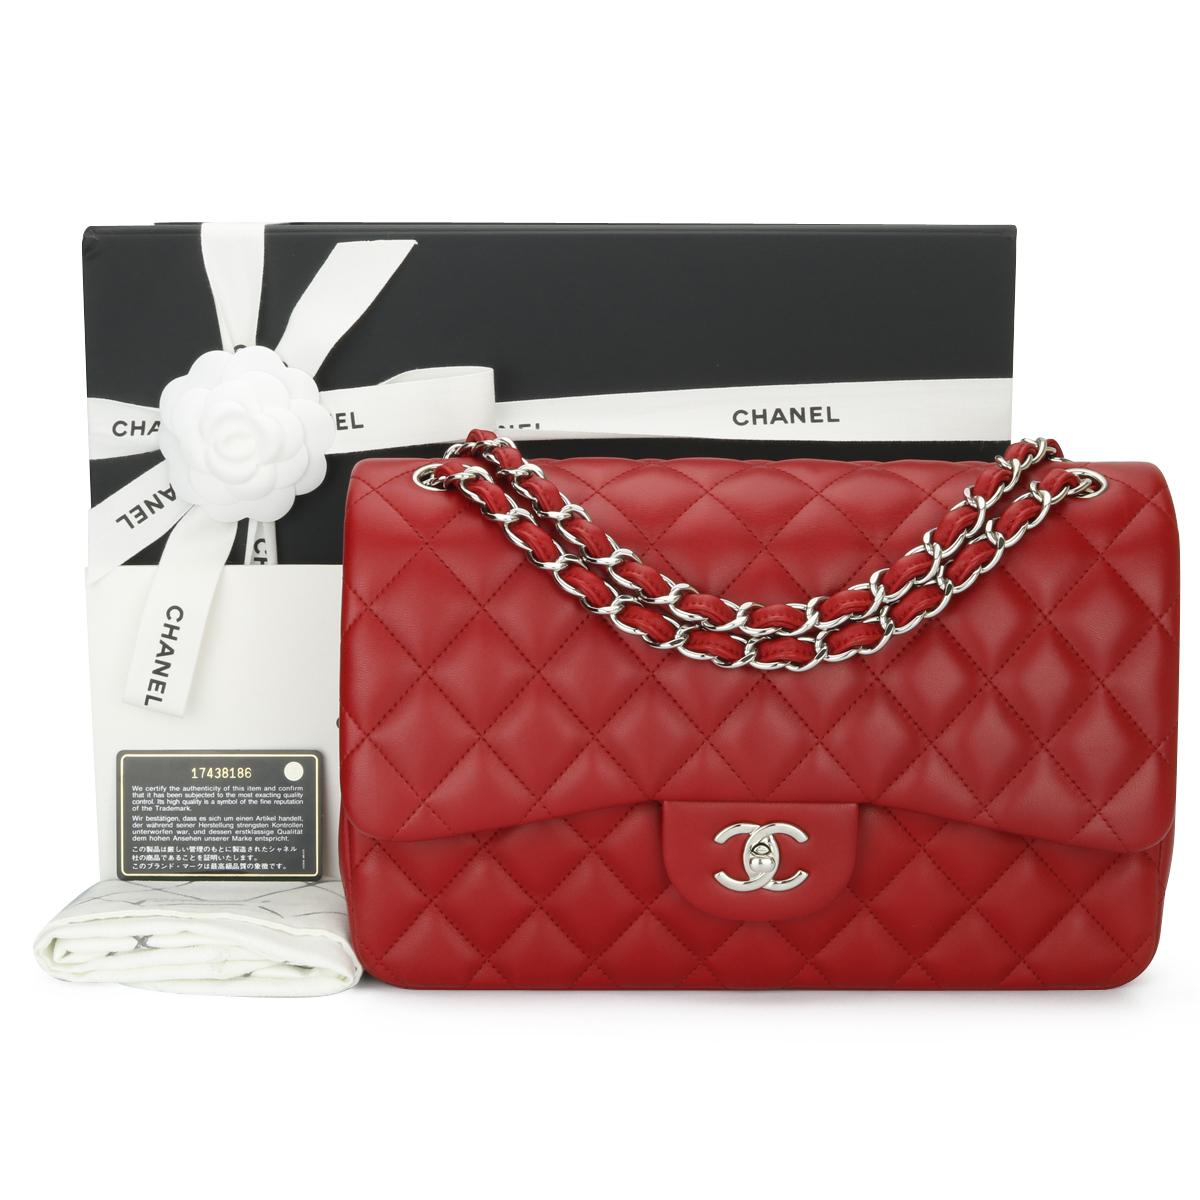 CHANEL Double Flap Jumbo Bag Red Lambskin with Silver Hardware 2013 13